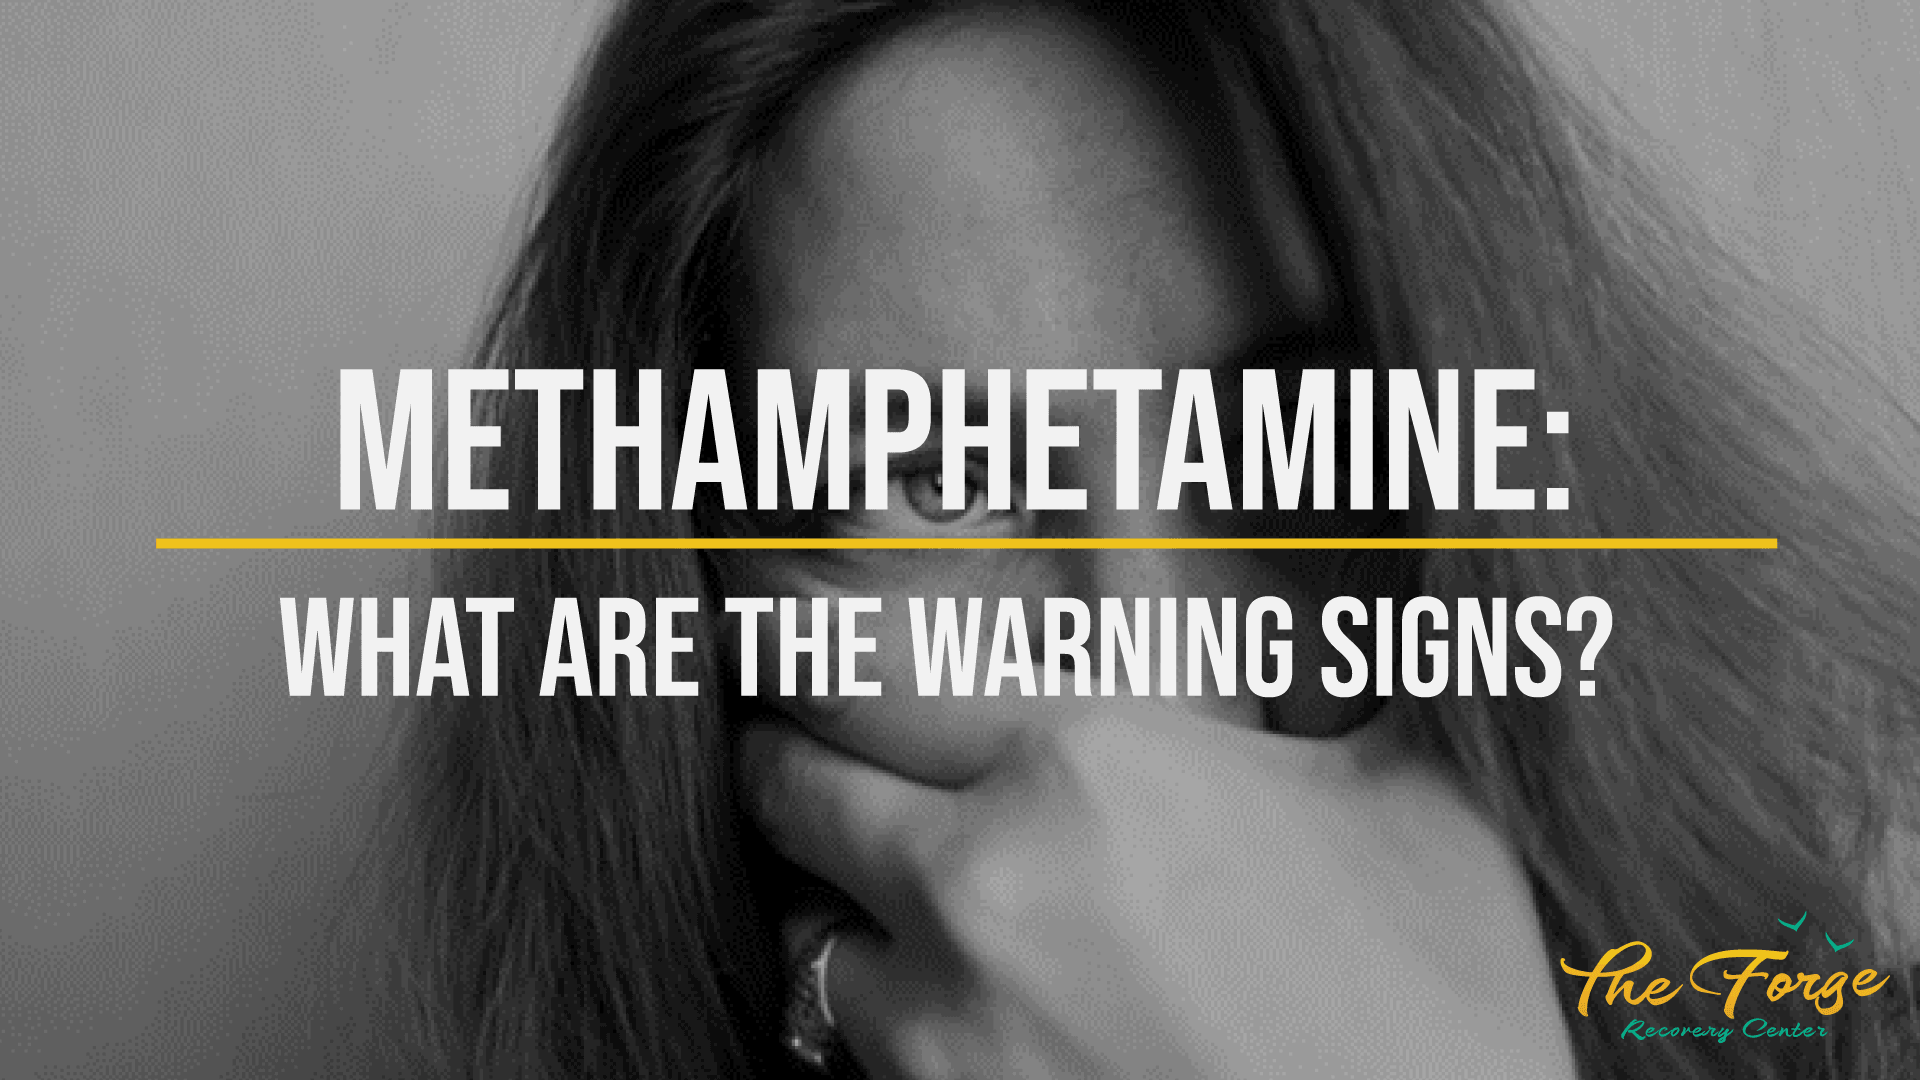 Methamphetamine Warning Signs: Do You Know What They Are?